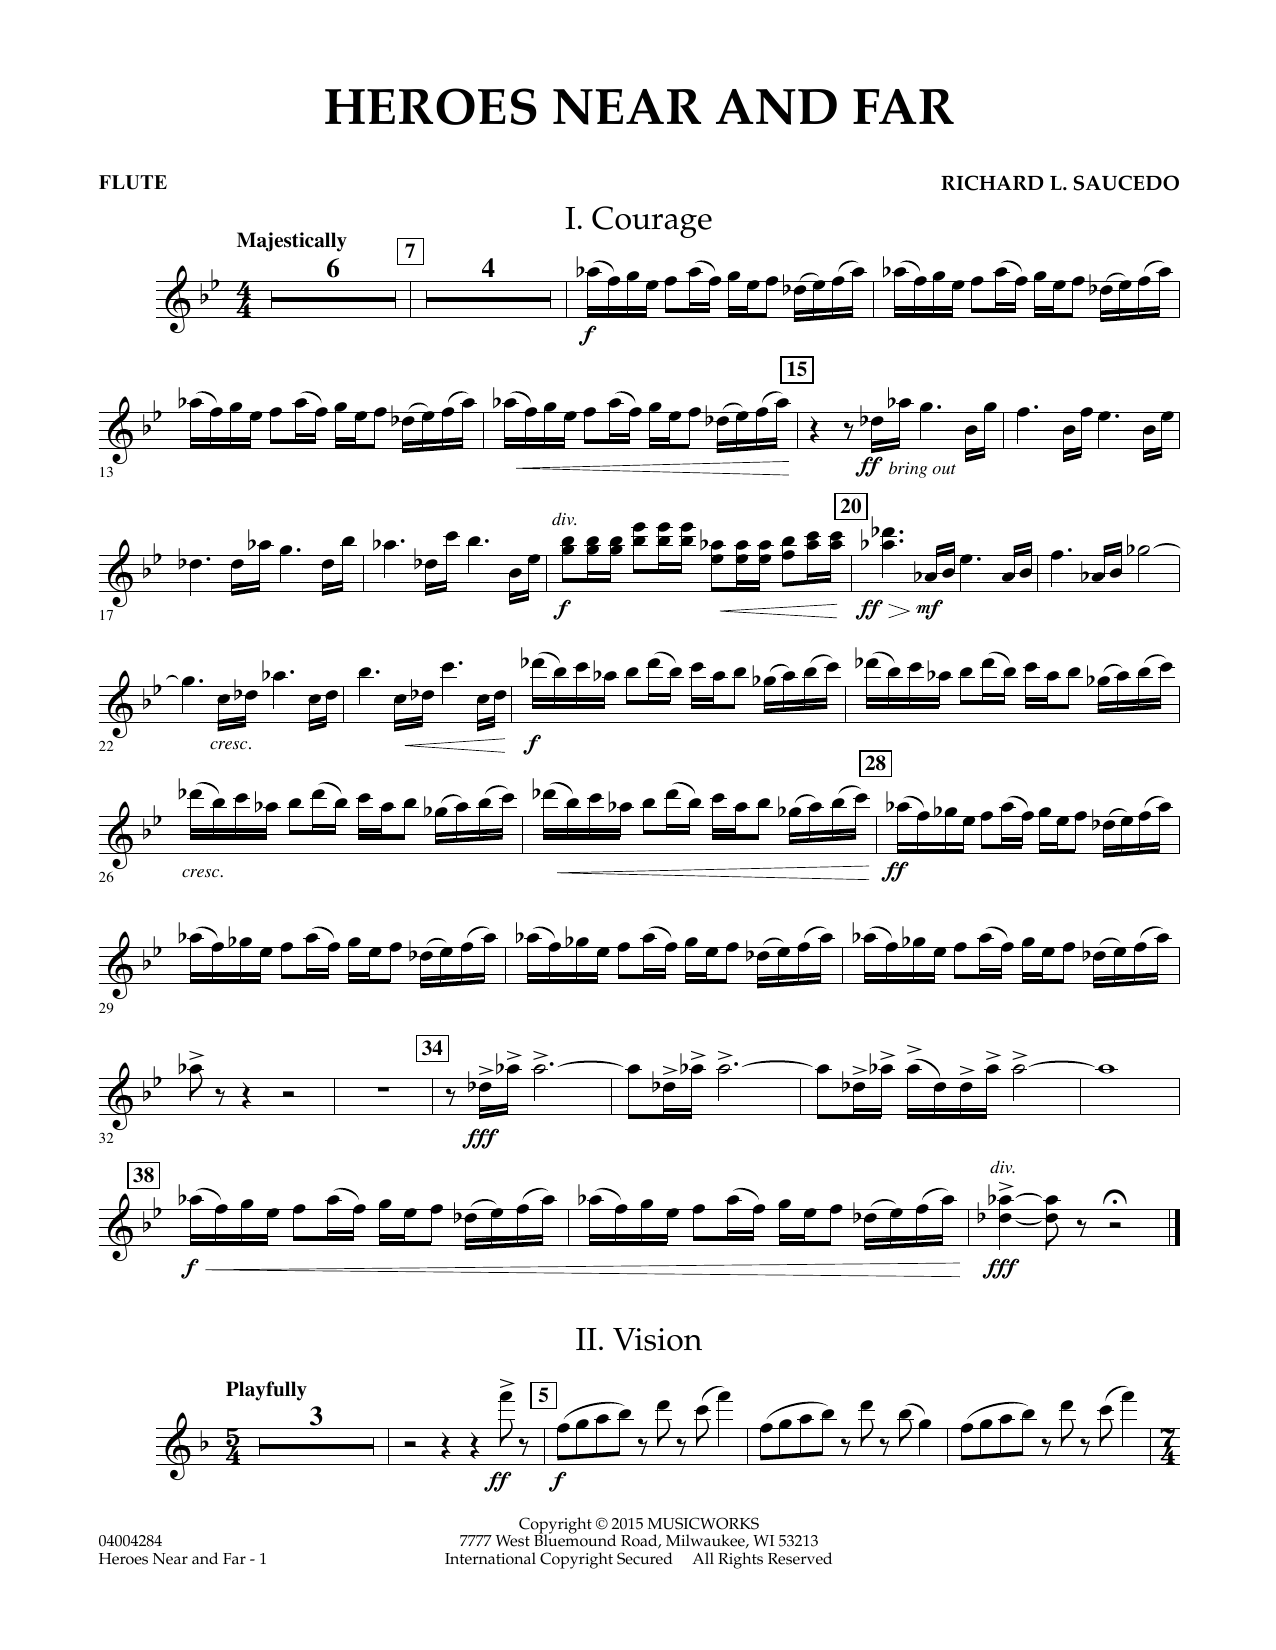 Richard L. Saucedo Heroes Near and Far - Flute sheet music notes and chords. Download Printable PDF.